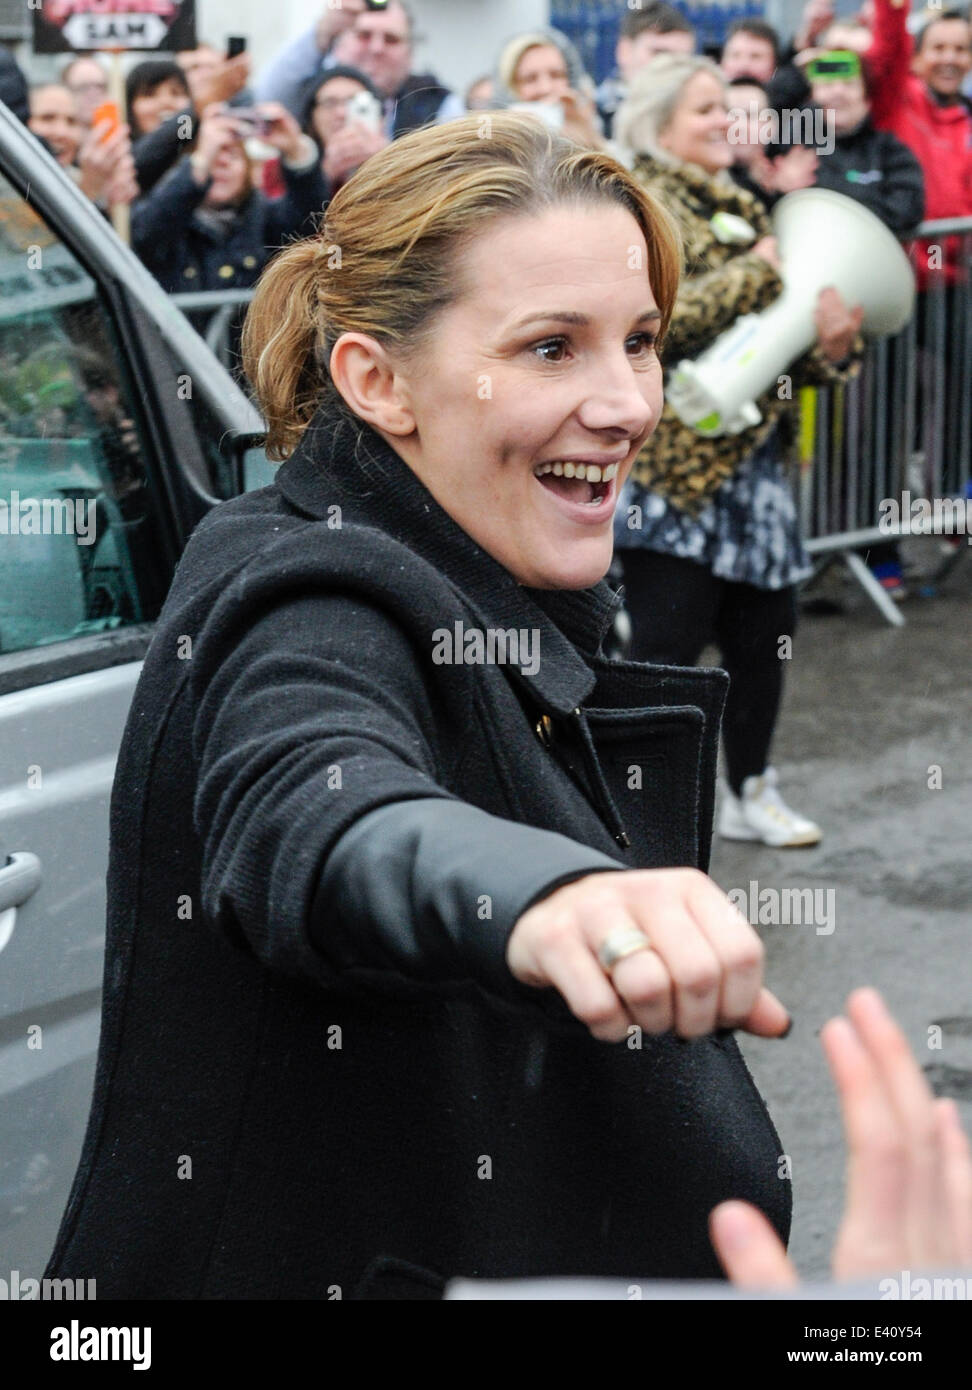 X Factor finalist Sam Bailey arrives at the Eyres Monsell Club & Institute in Leicester to perform and meet mentor Sharon Osbourne ahead of the X Factor Final  Featuring: Sam Bailey Where: Leicester, United Kingdom When: 12 Dec 2013 Stock Photo